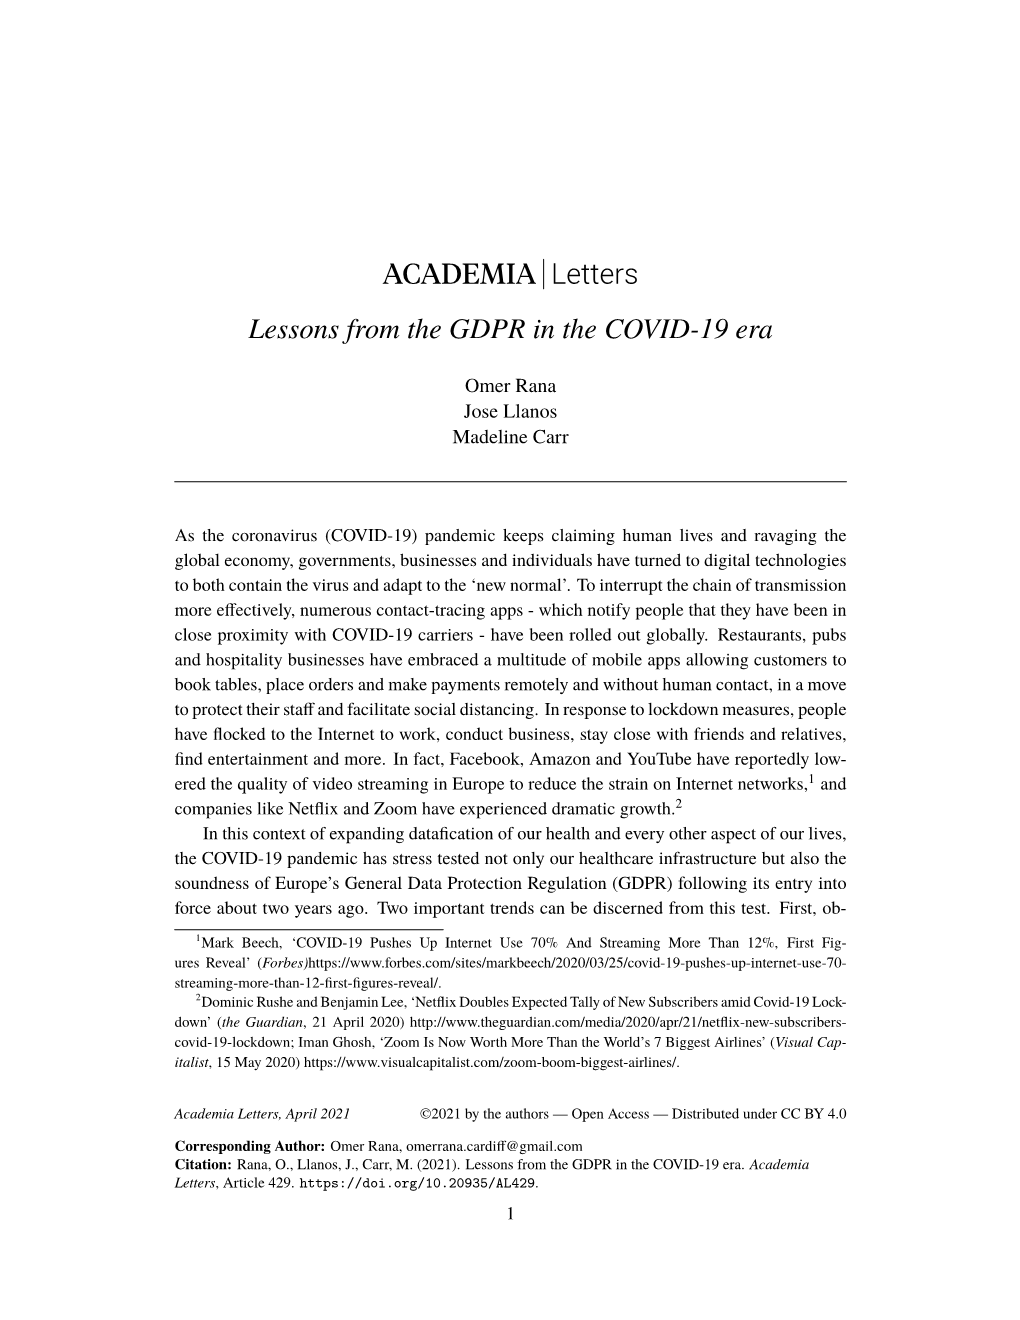 ACADEMIA Letters Lessons from the GDPR in the COVID-19 Era